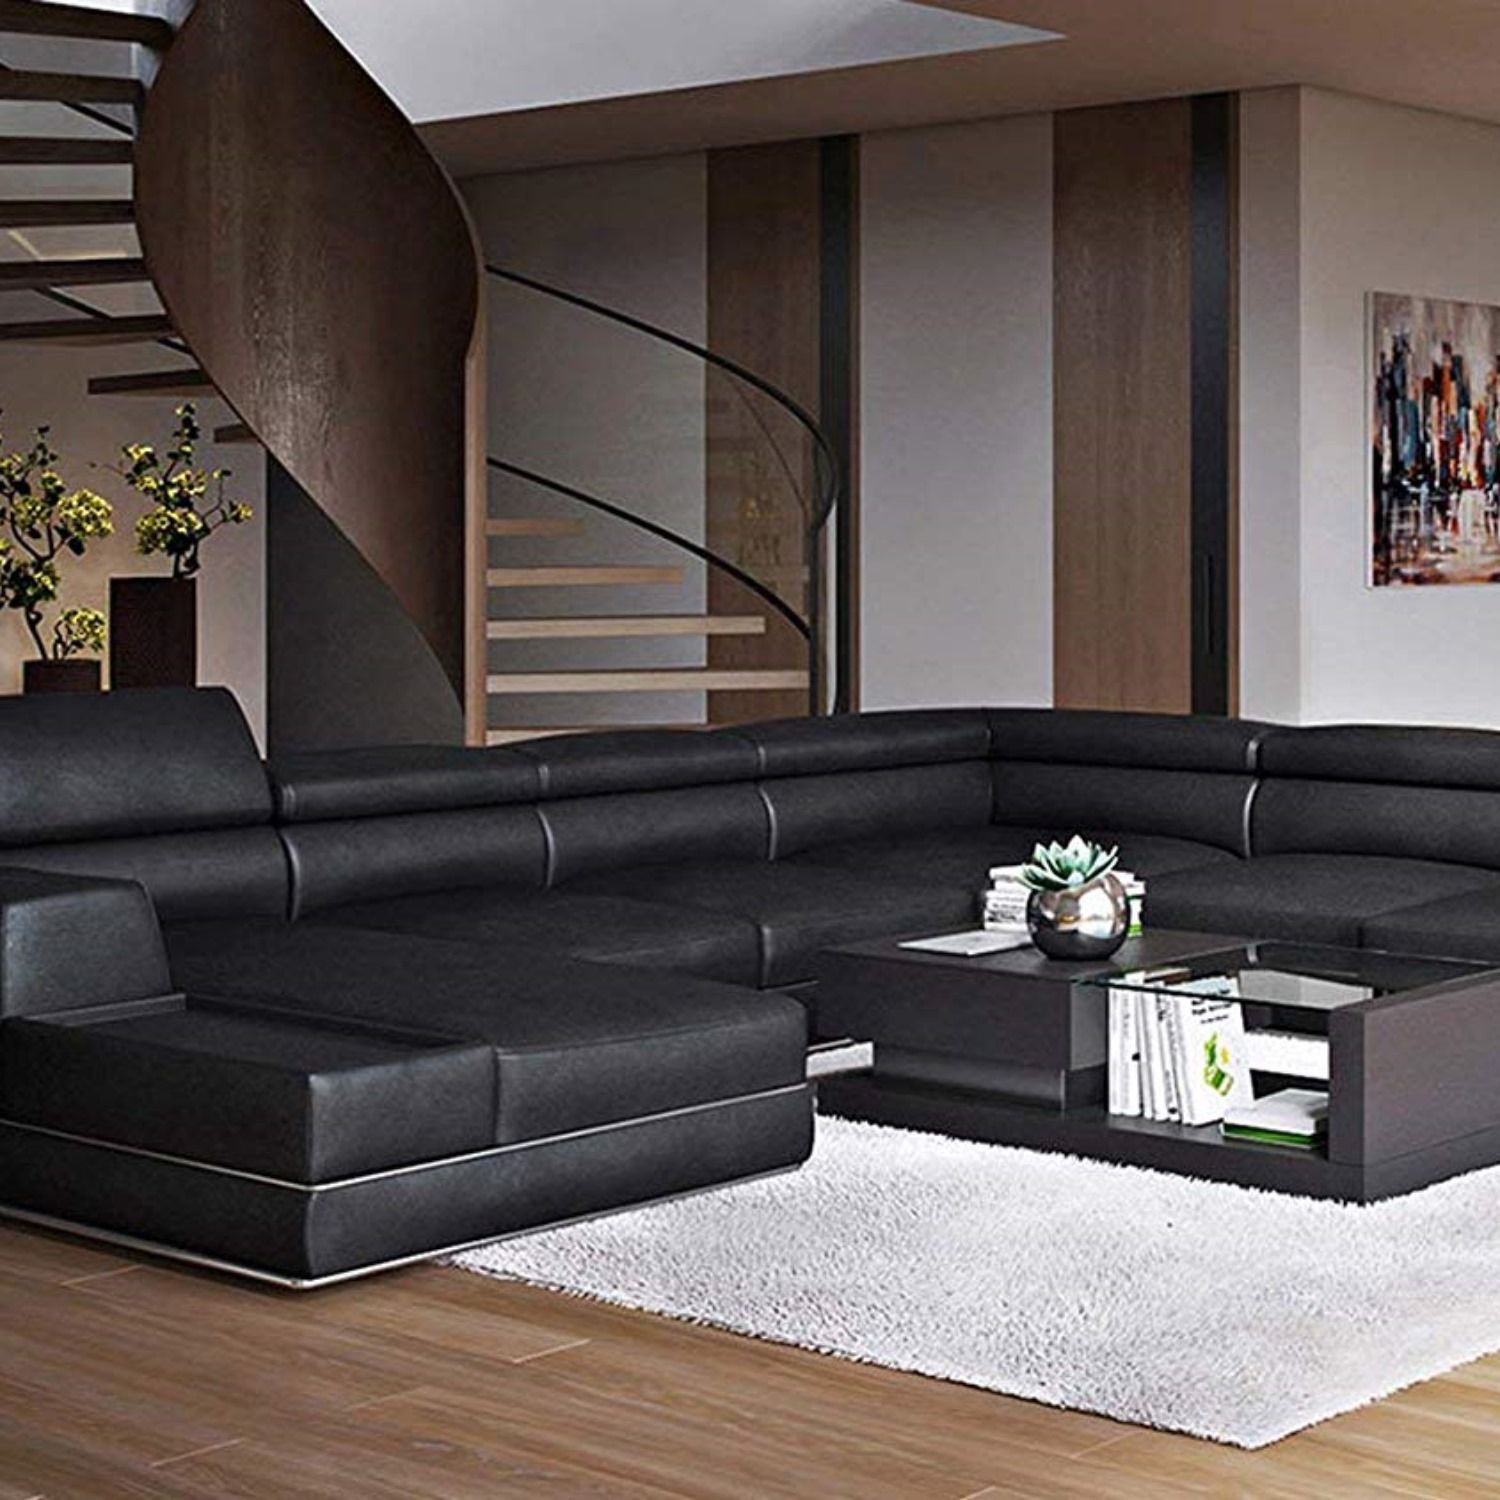 Modern Black Leather Sectional Sofa Living Room Couch Sleek Intended For Right Facing Black Sofas (View 13 of 20)